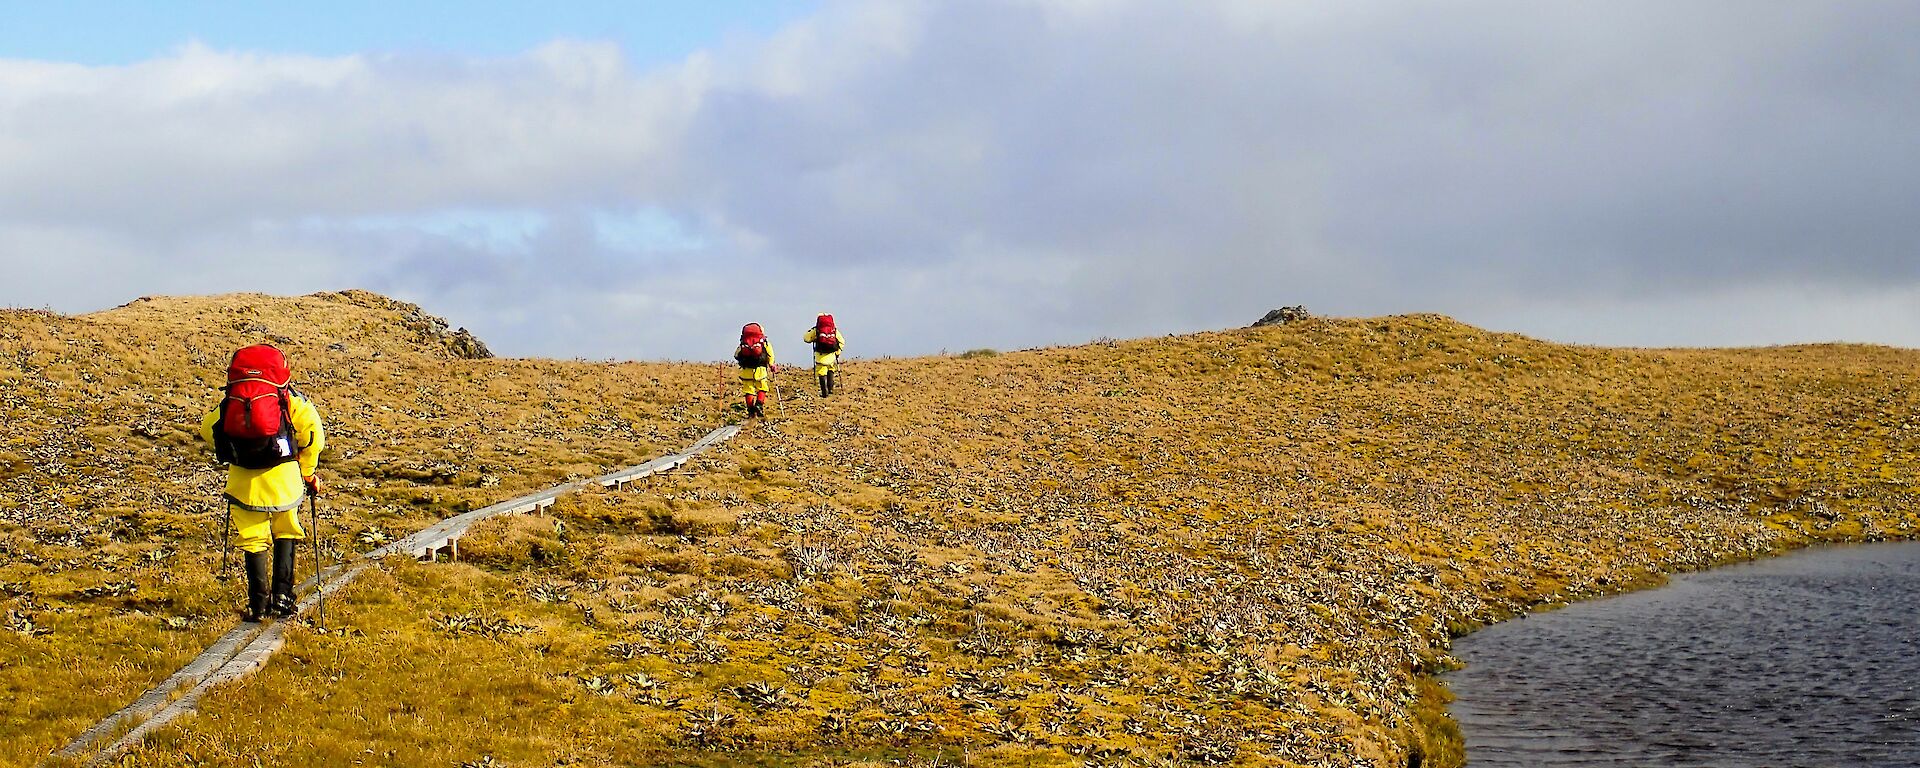 Danielle McCarthy, Peter Lecompte, Annette Fear and Richard Youd hiking the Inland Lake Track heading towards Bauer Bay hut on Macquarie Island